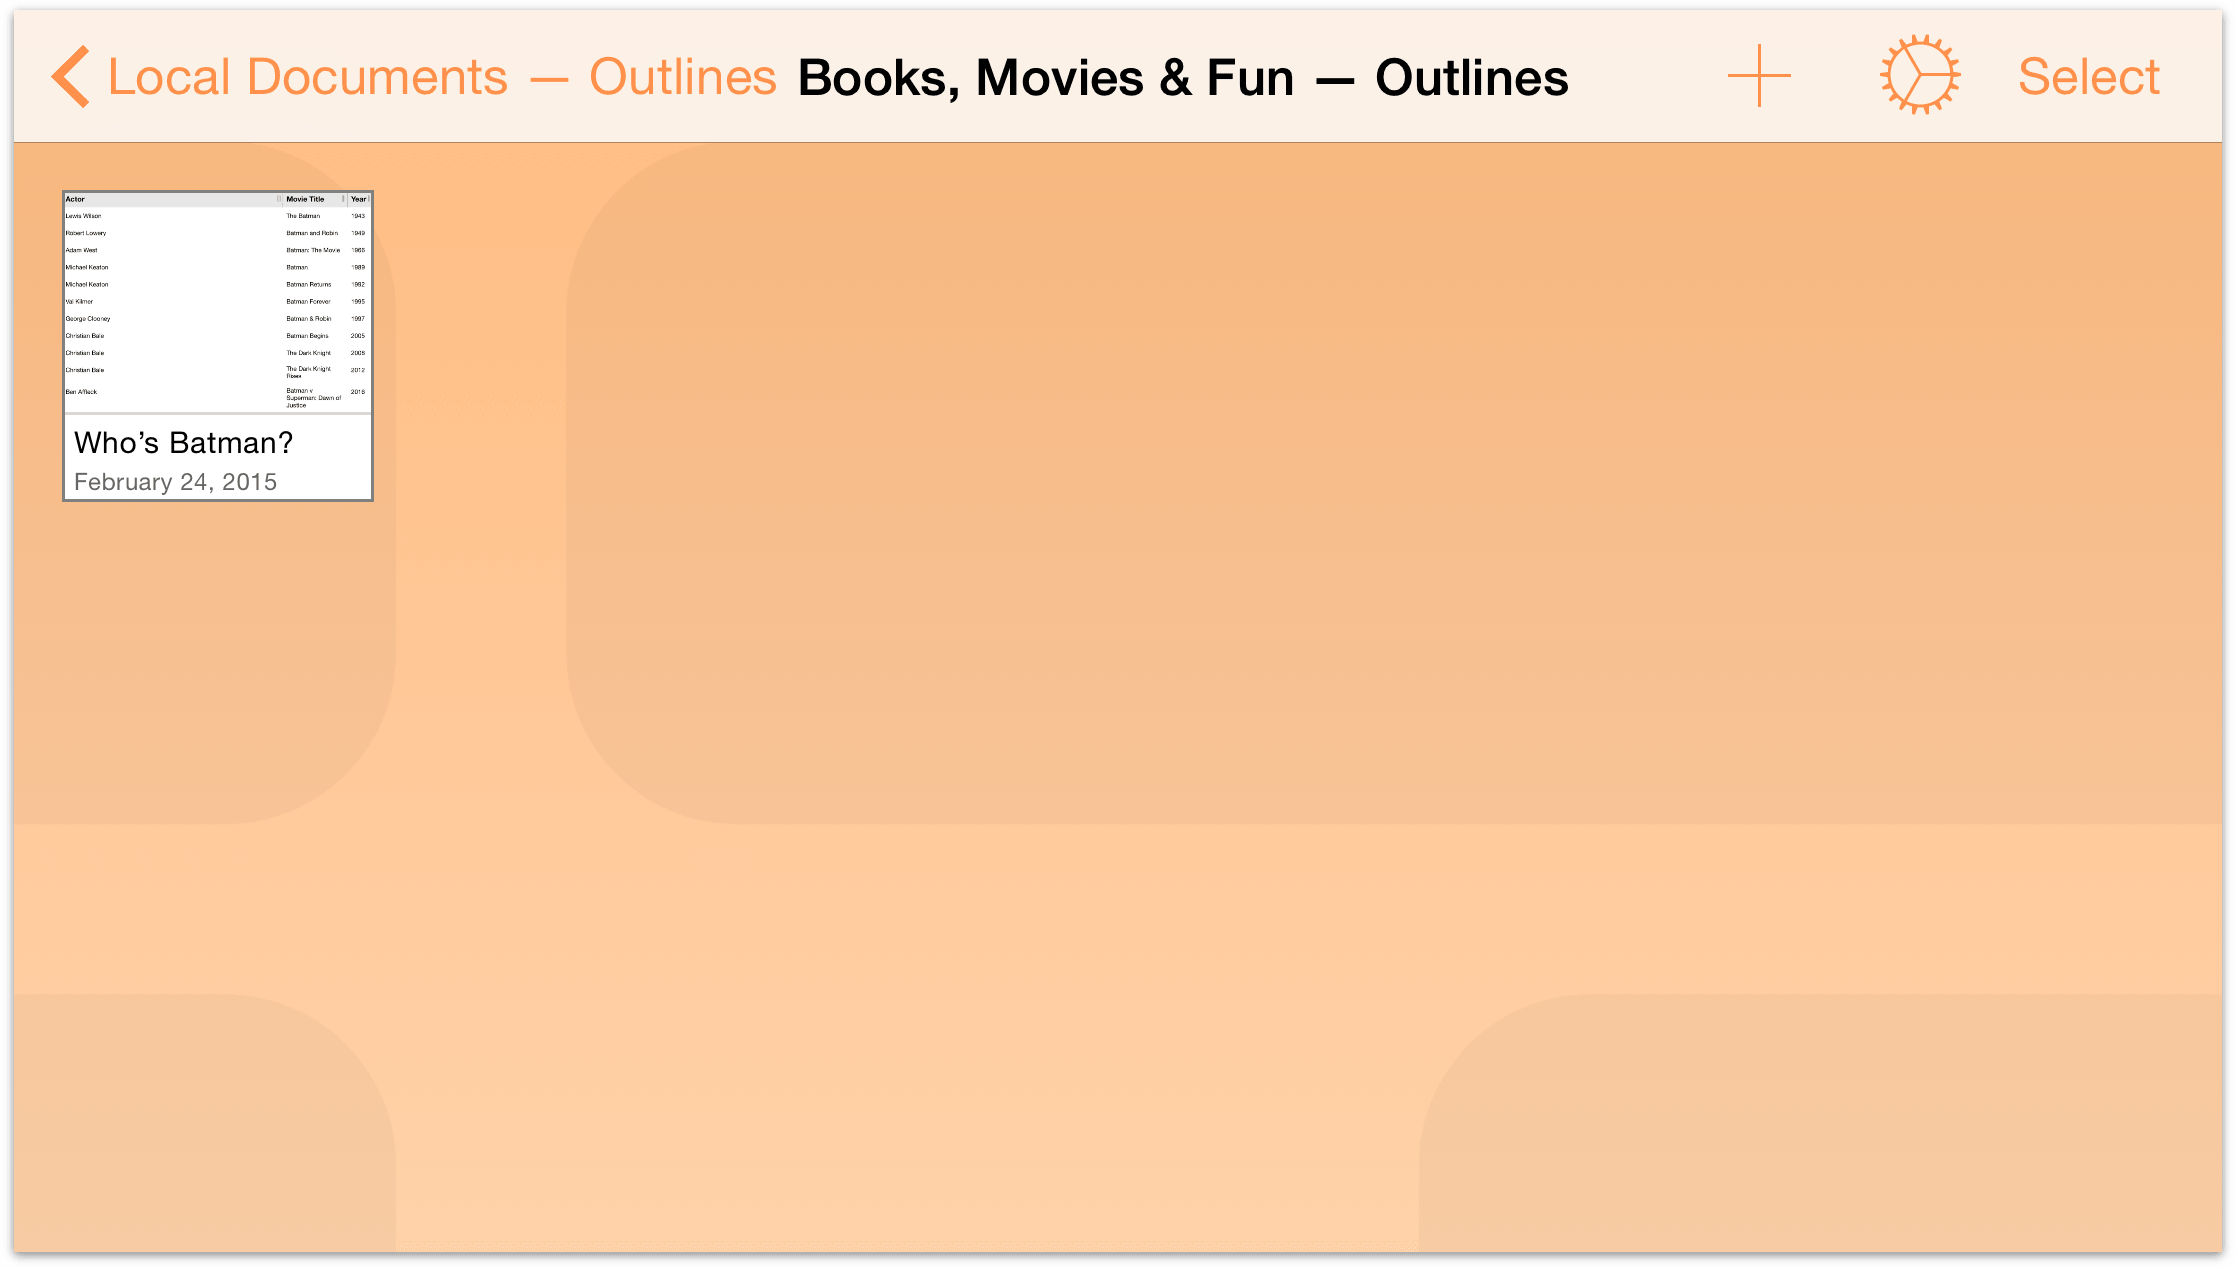 Tap to open the subfolder and then tap on the file you'd like to open in OmniOutliner.